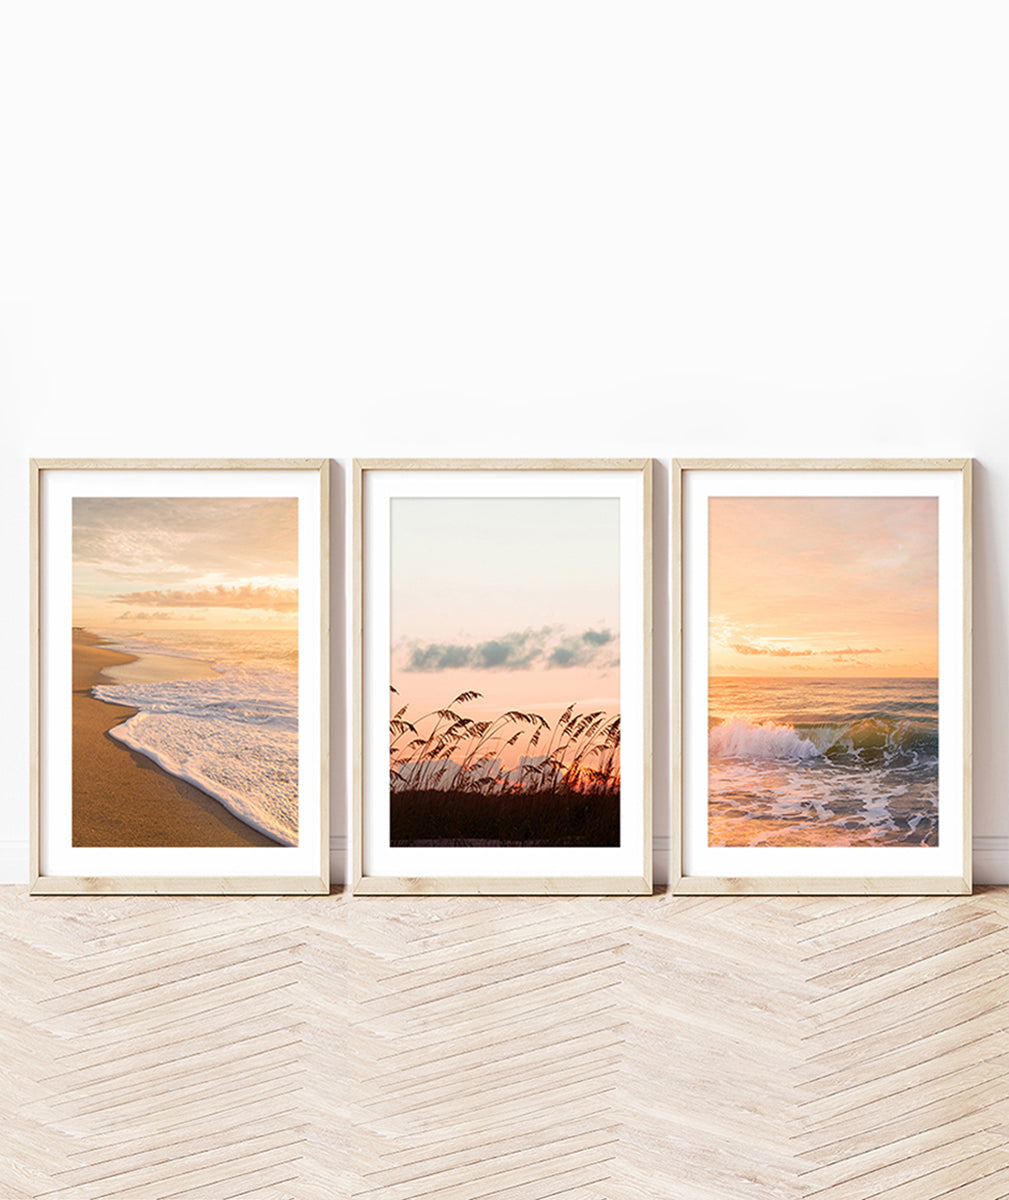  Beach Sunset View 3D Window Effect Canvas Wall Art Picture  Print (30X20), Bedroom: Posters & Prints